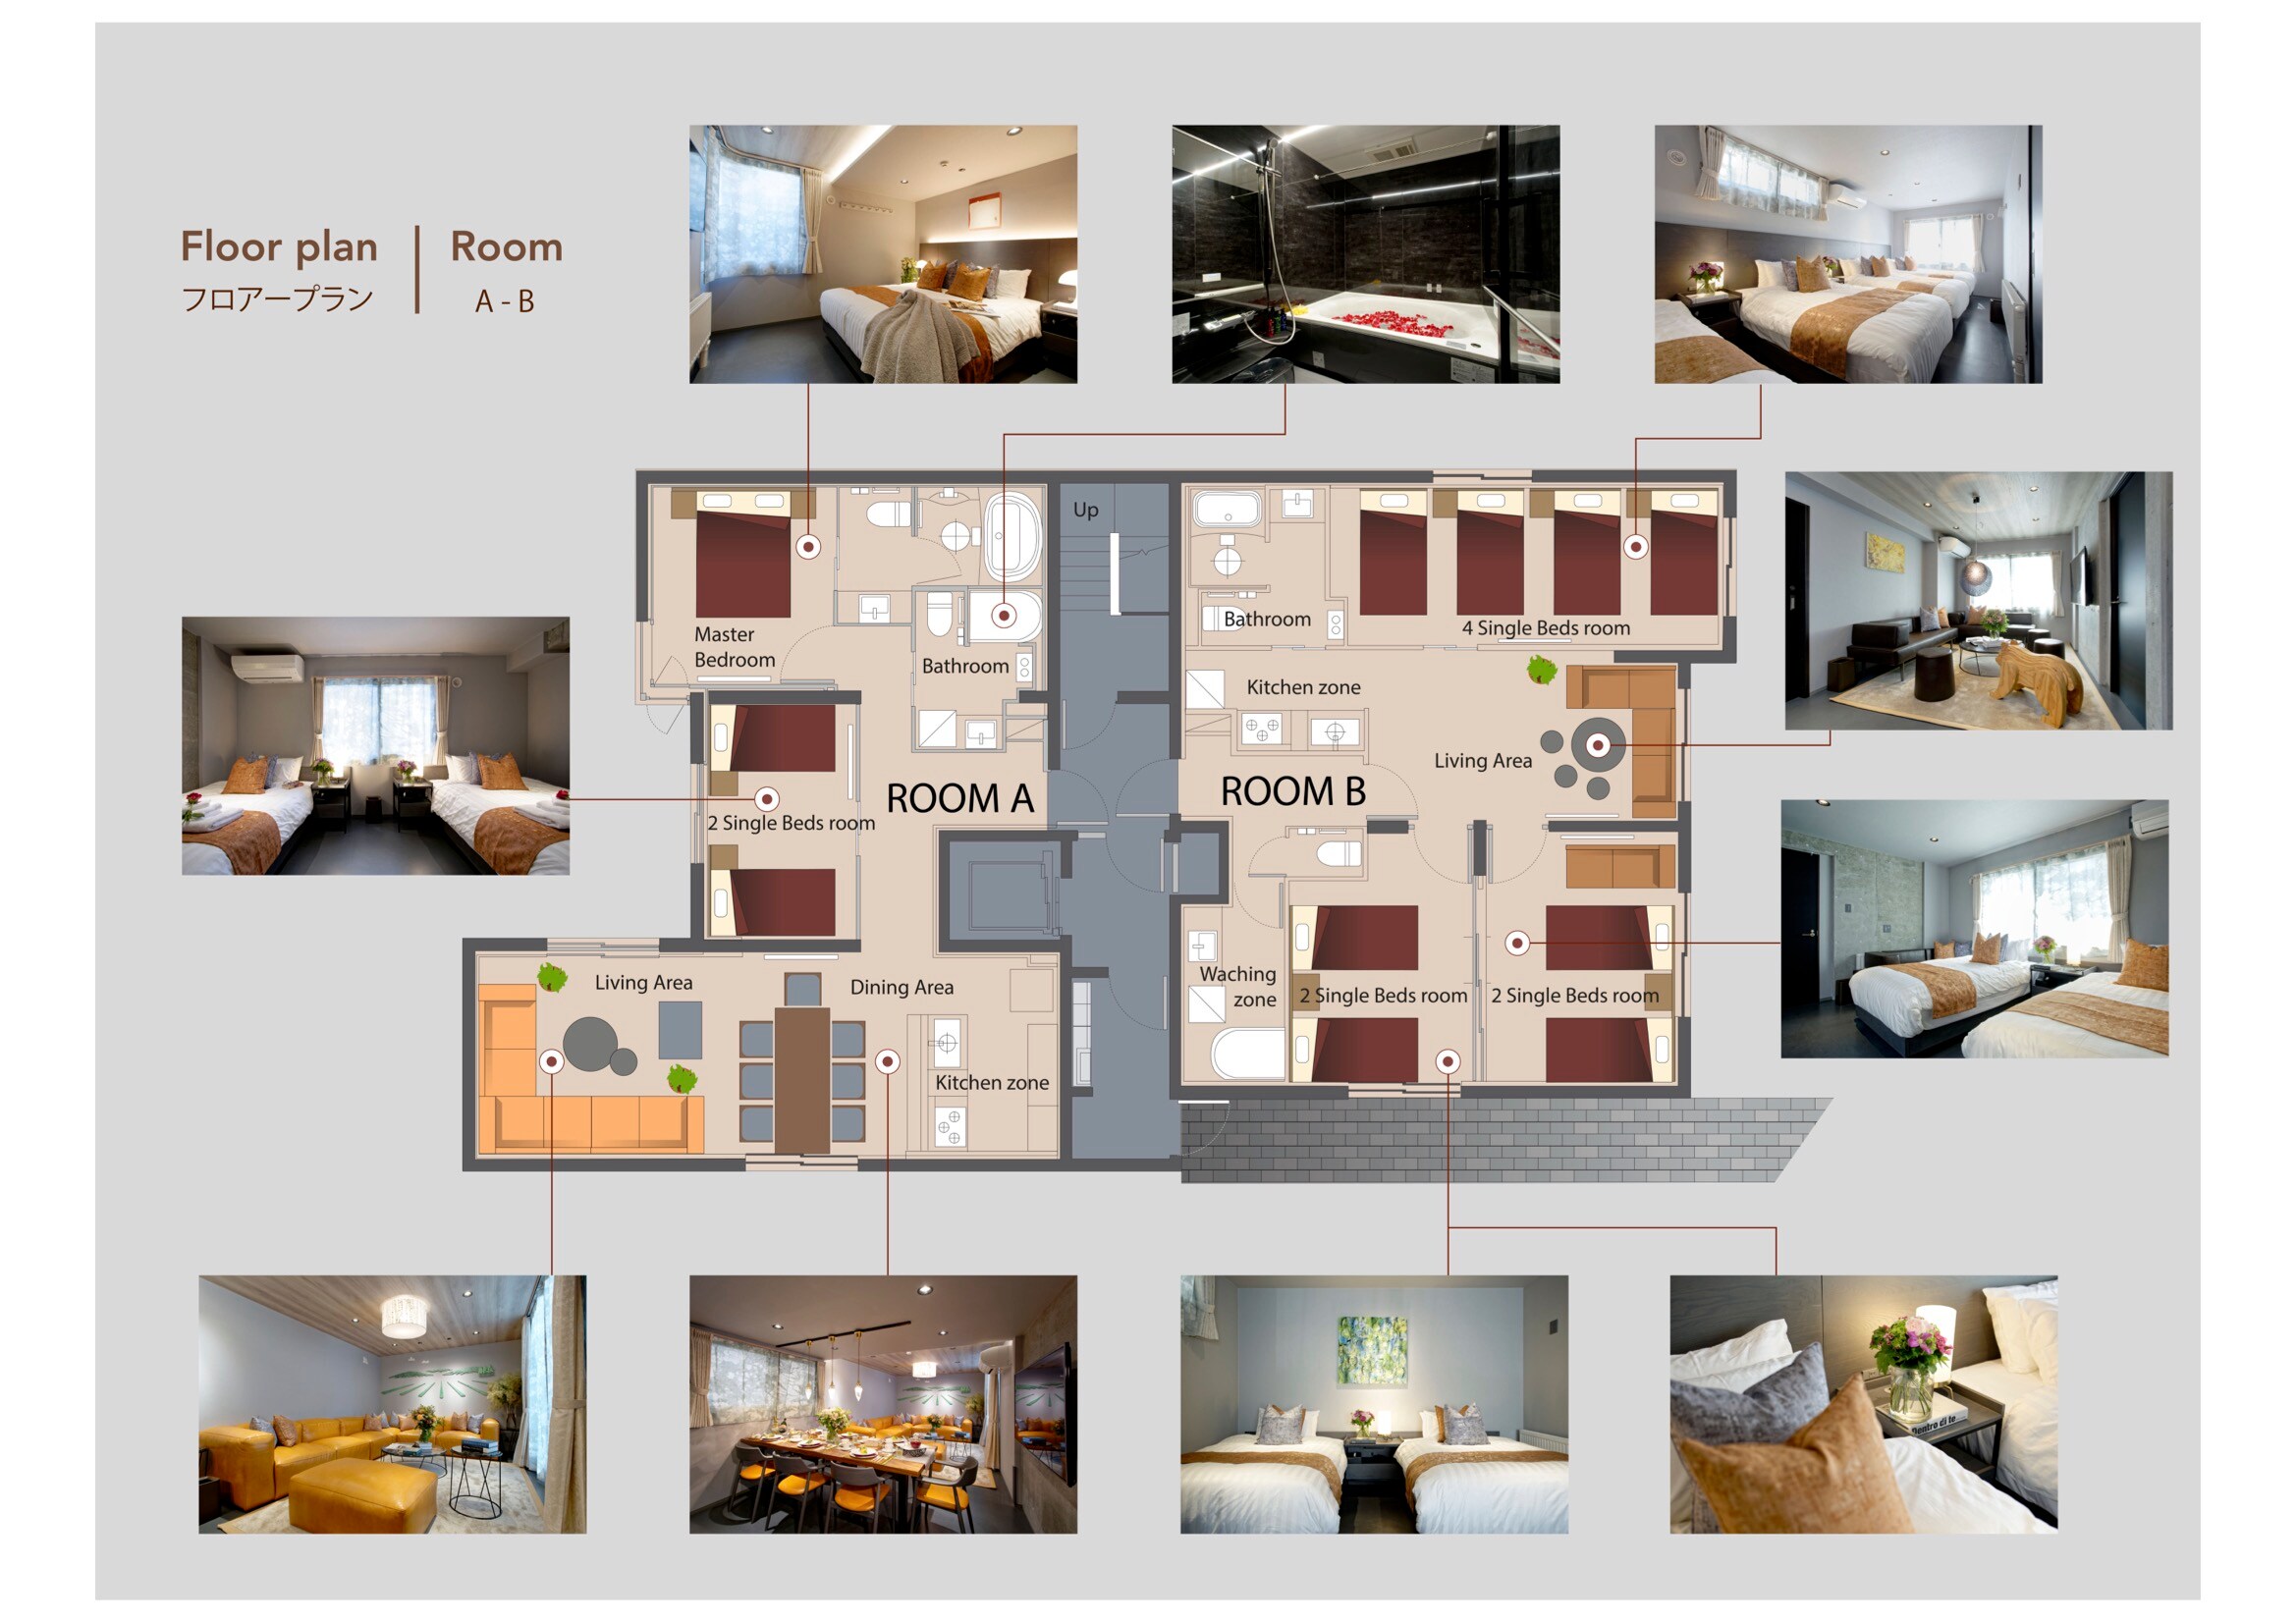 Property Image 2 - Nice Modish Apartment 450m away from JR station 